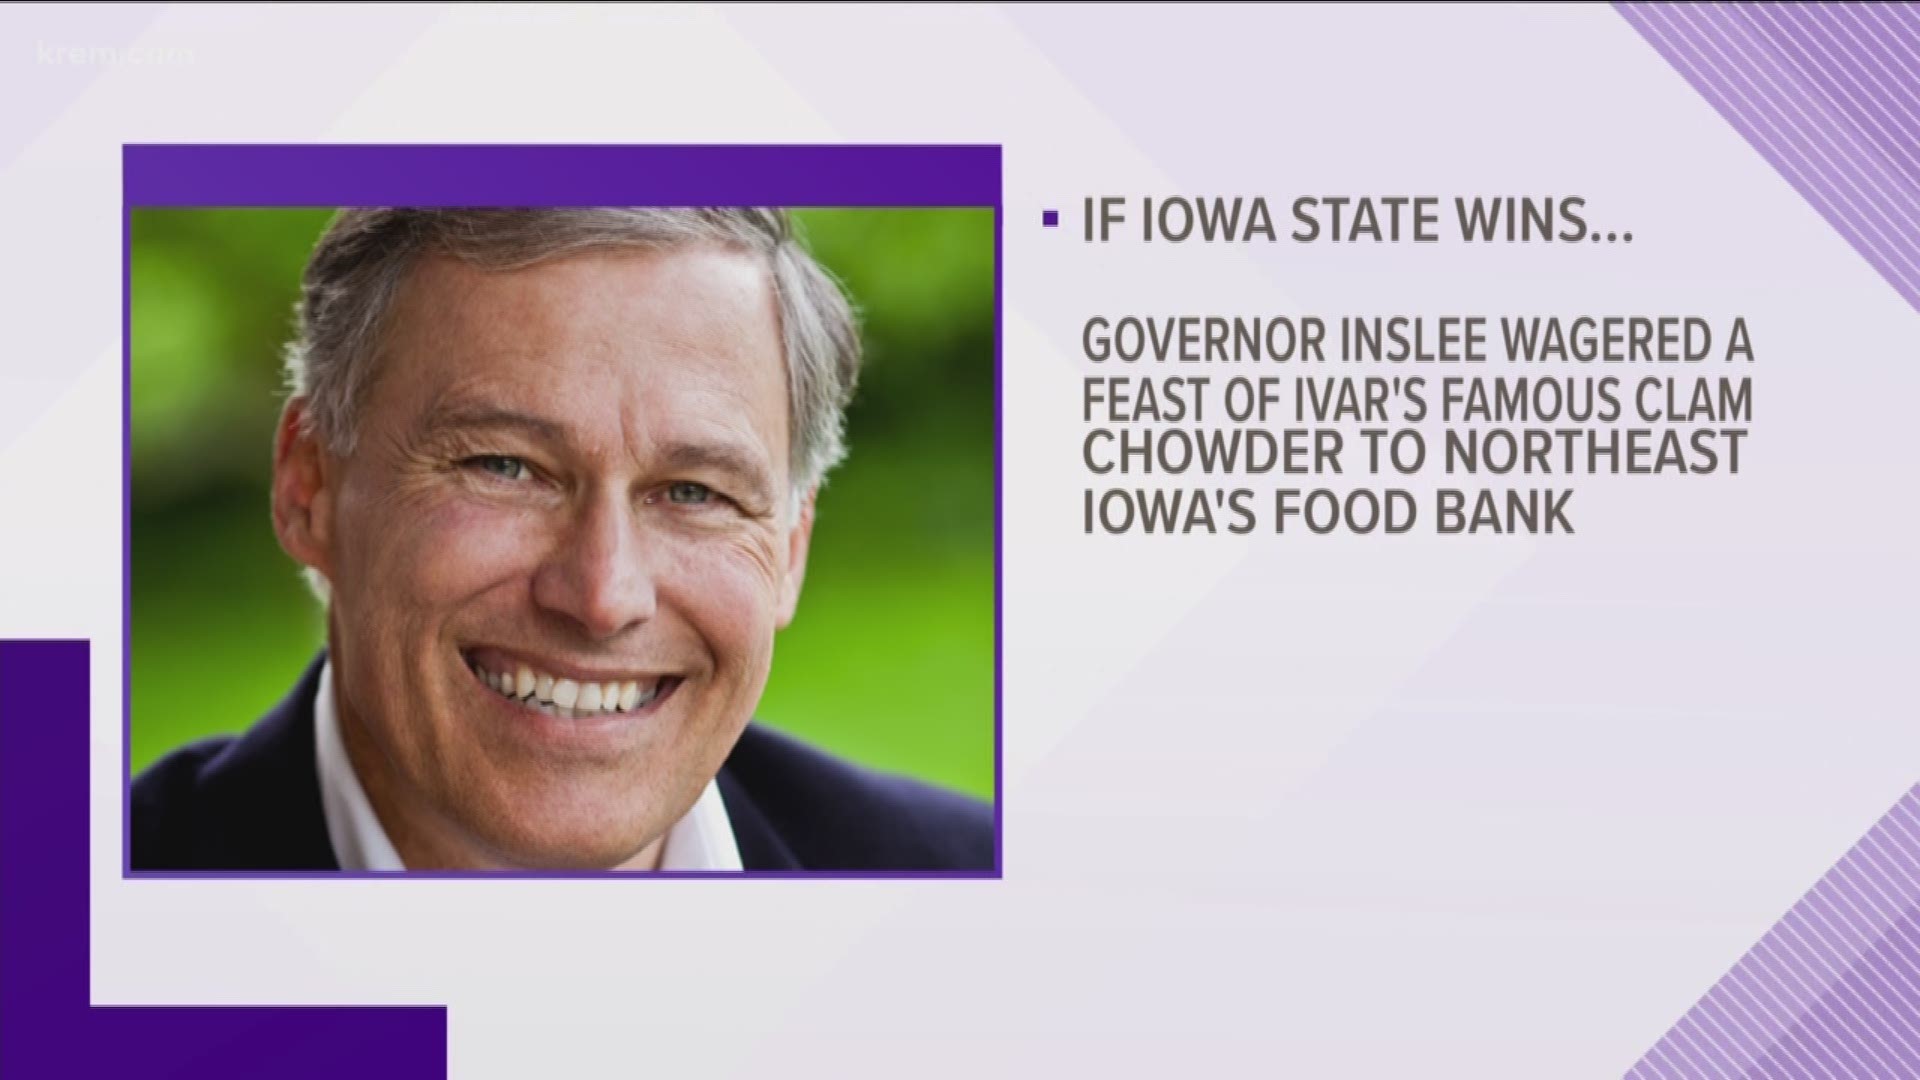 WA Governor Jay Inslee makes a bet with Iowa's governor on who will win the Alamo Bowl.